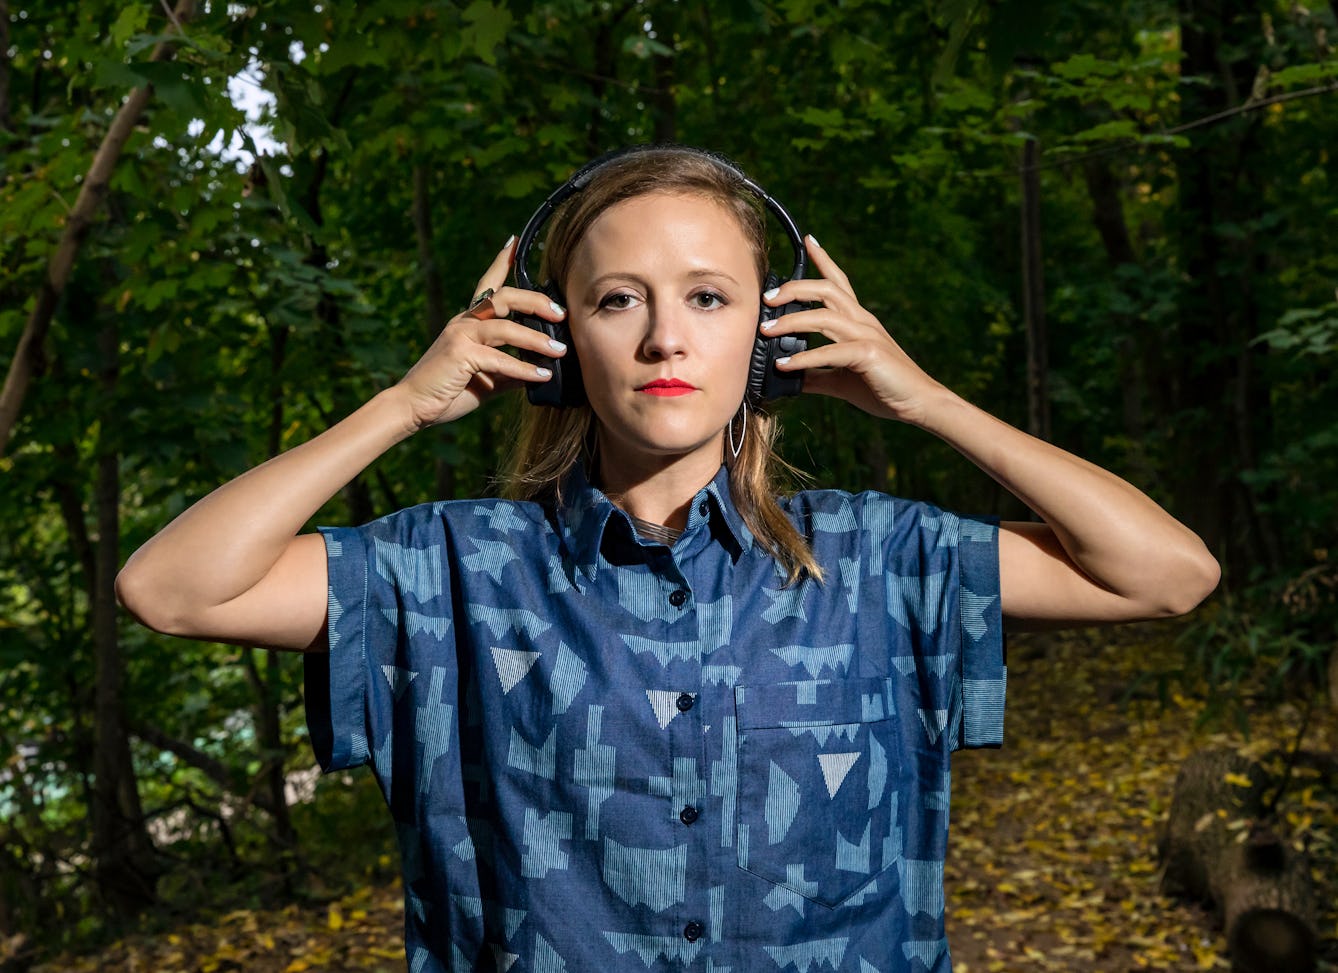 A photograph of a woman with long brown hair holding a pair of headphones to her ears, surrounded by trees.